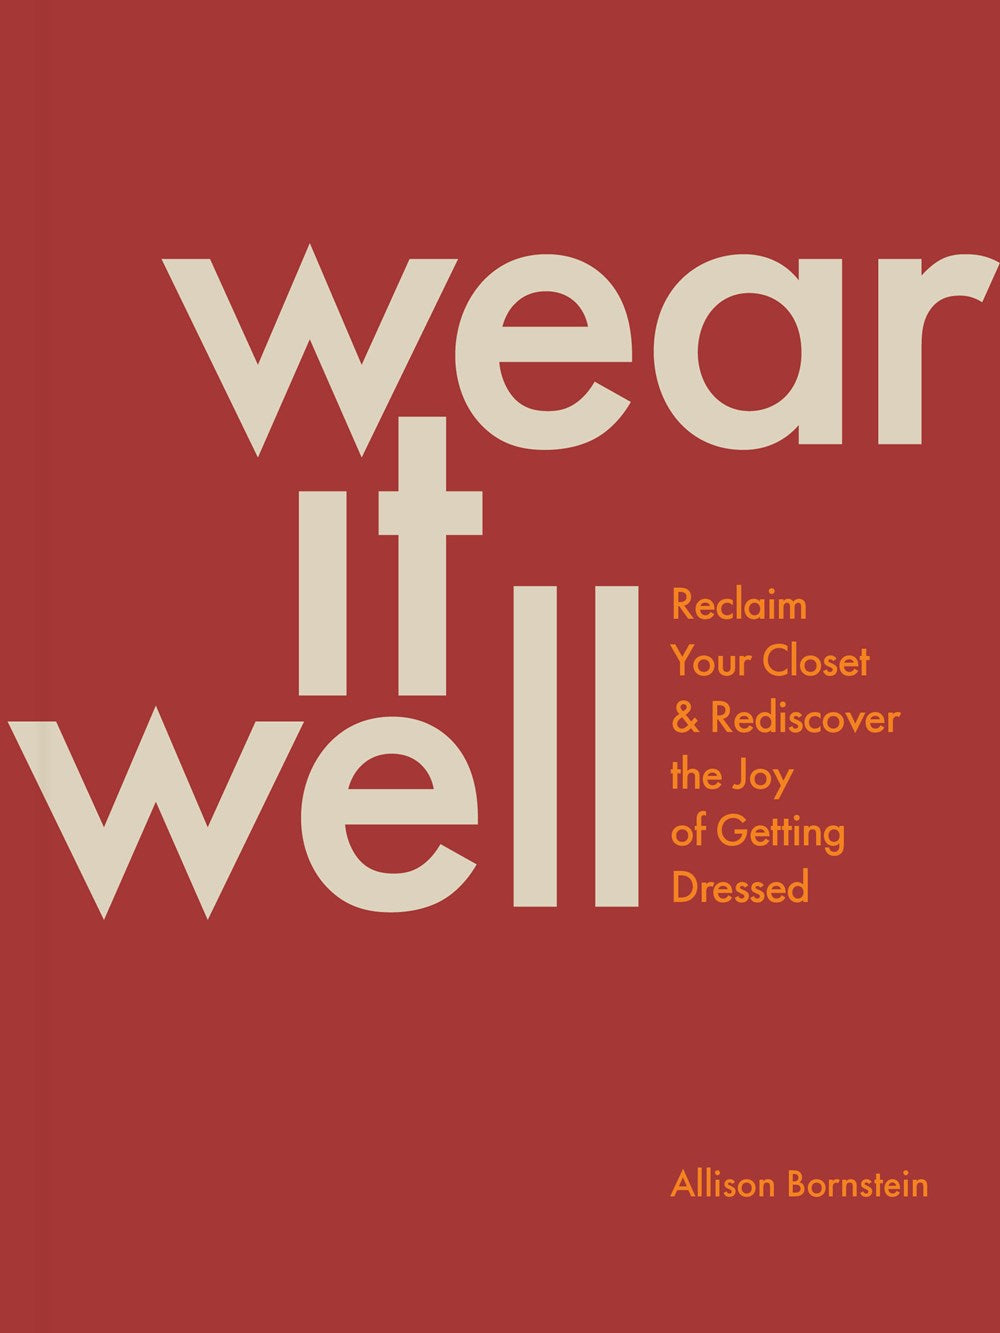 Wear It Well: Reclaim Your Closet and Rediscover the Joy of Getting Dressed by Allison Bornstein